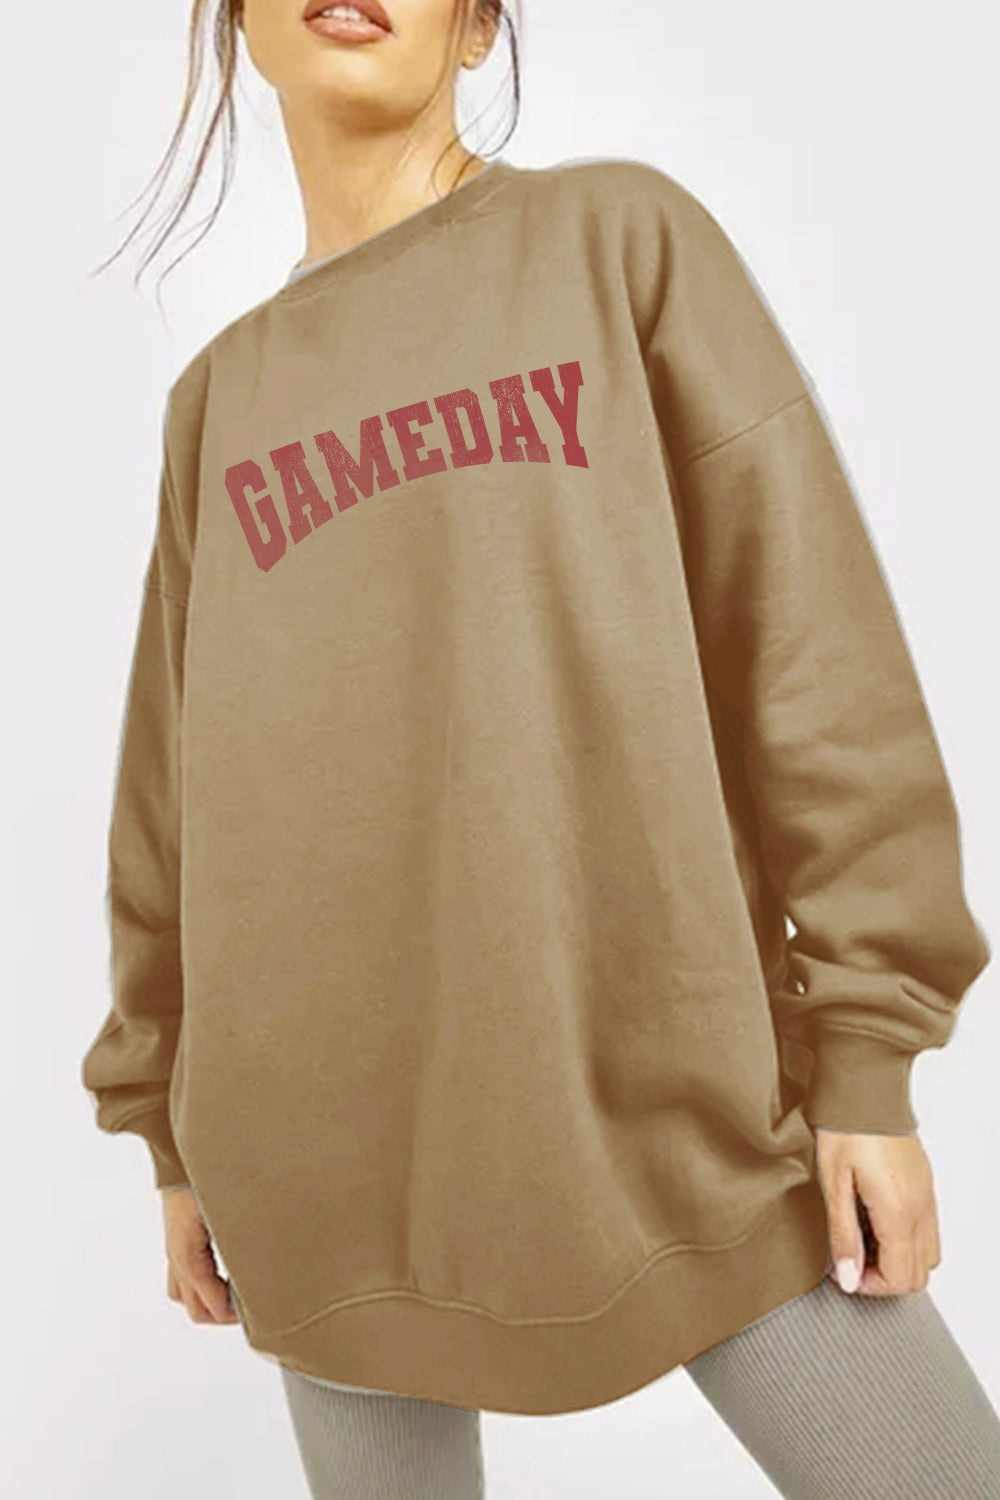 Simply Love GAMEDAY Graphic Sweatshirt - Online Only